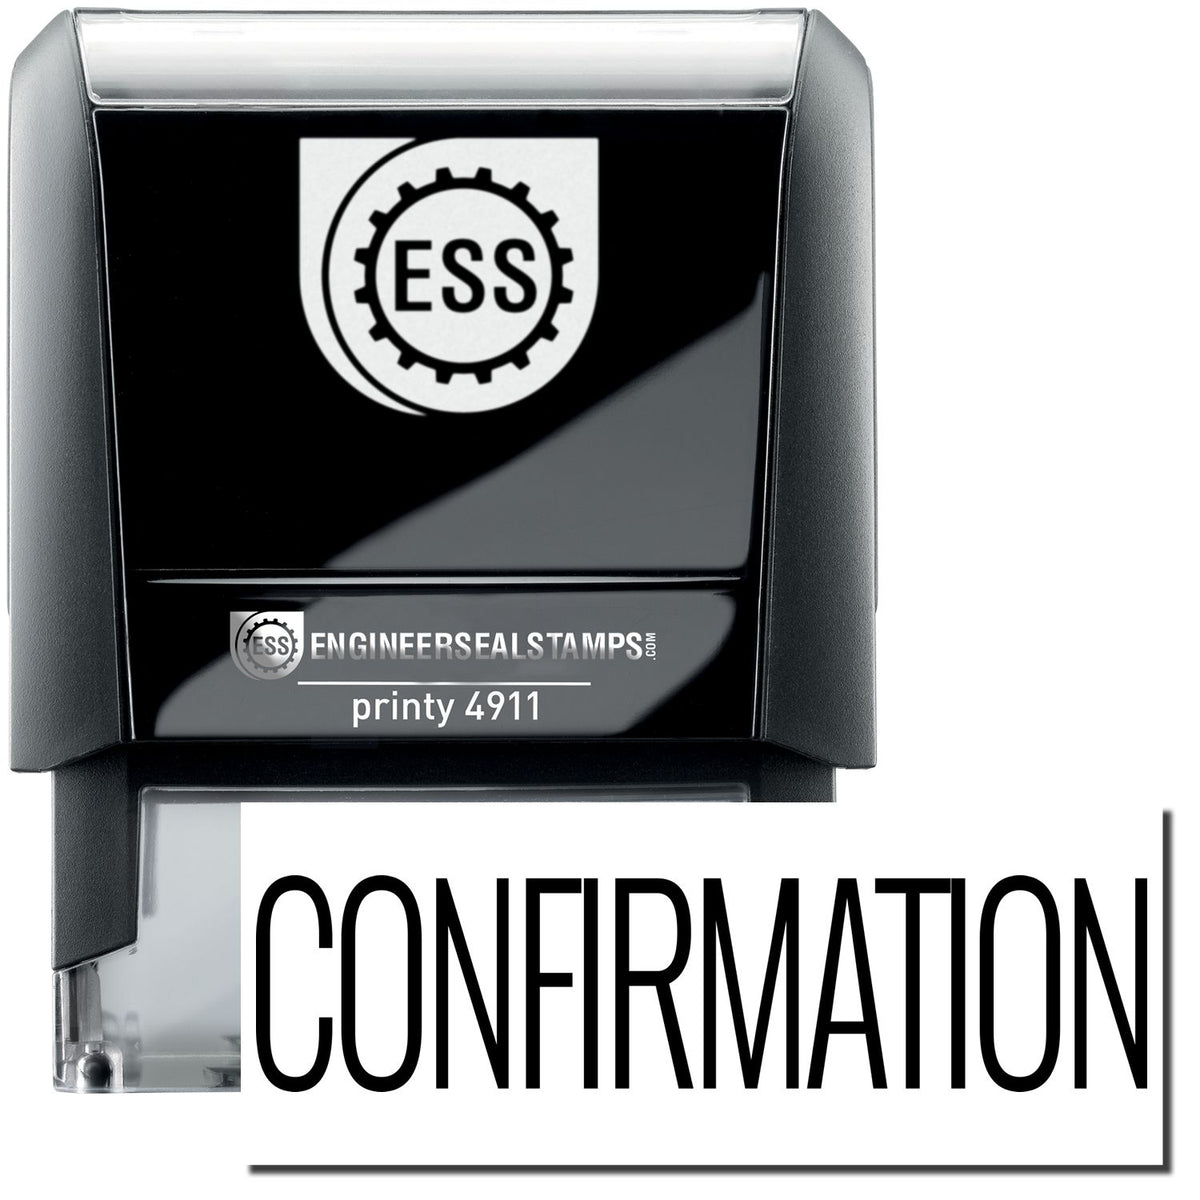 A self-inking stamp with a stamped image showing how the text &quot;CONFIRMATION&quot; is displayed after stamping.